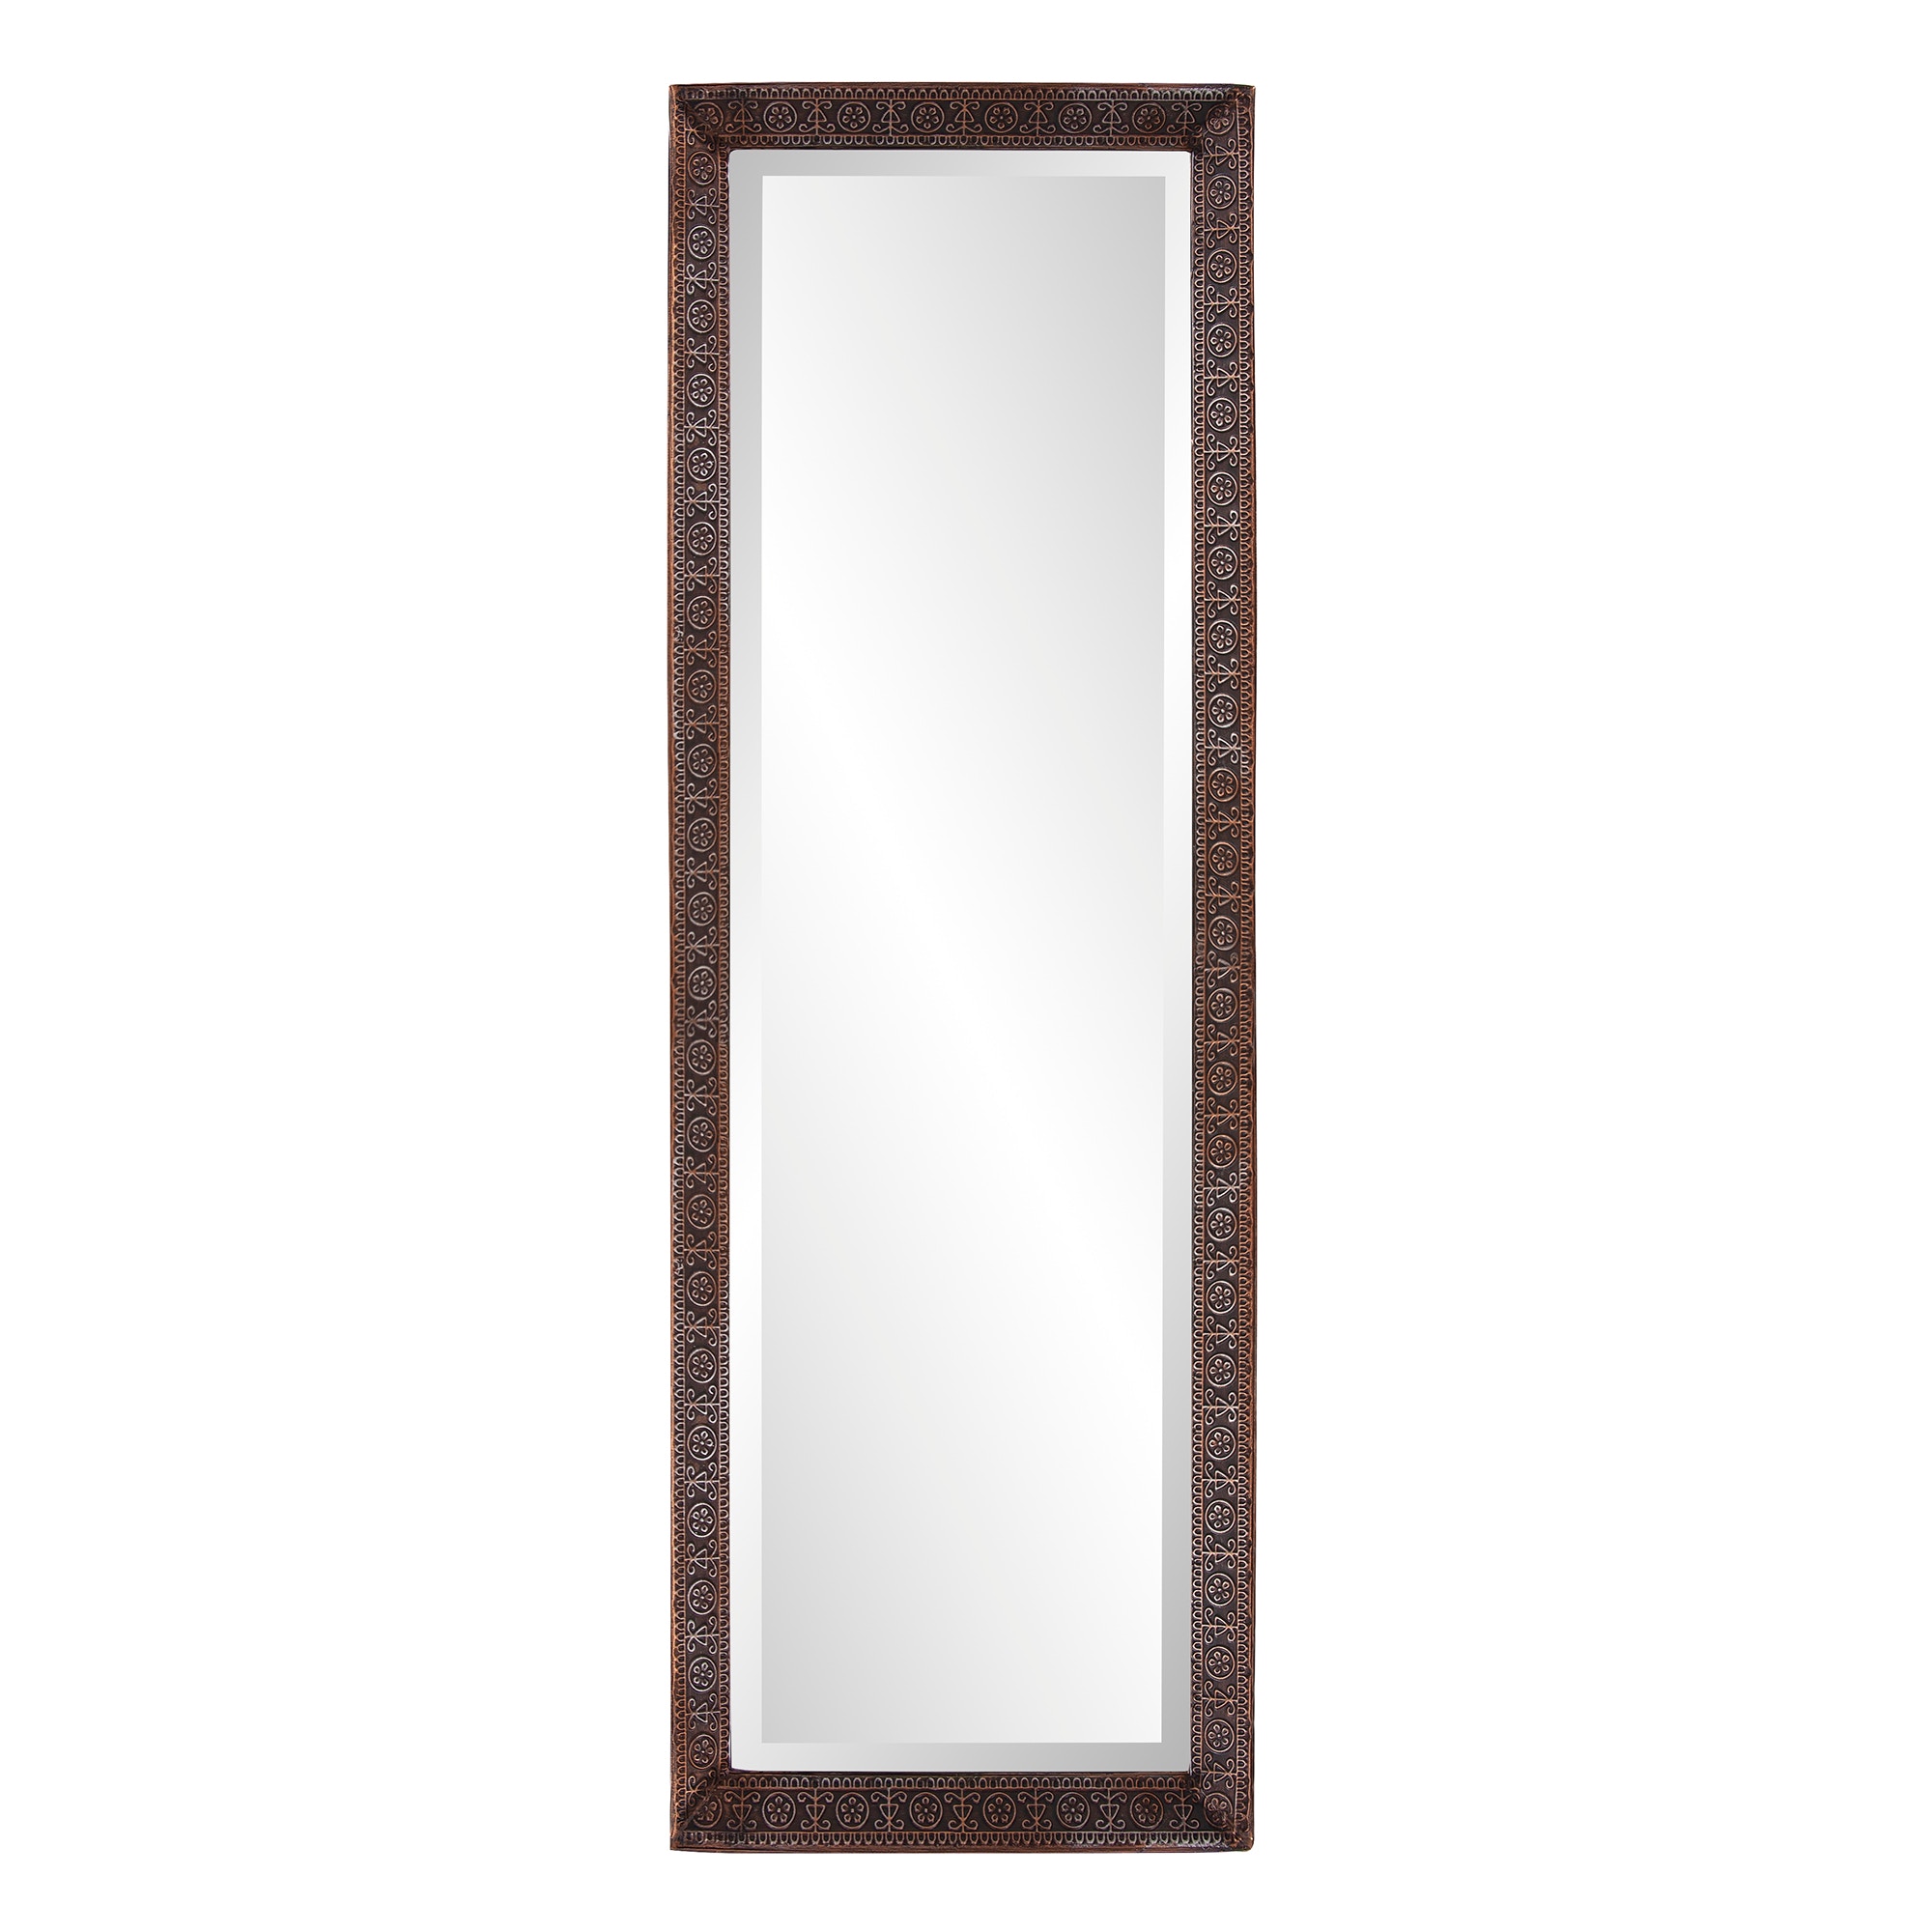 Buy 999STORE Printed Mirrors for Living Room Big Size Dressing Mirror for  Room Blue Abstract Pattern Big Wall Mirror for Bedroom (MDF_18X48 Inches)  MirrorBMP55 Online at Low Prices in India - Amazon.in